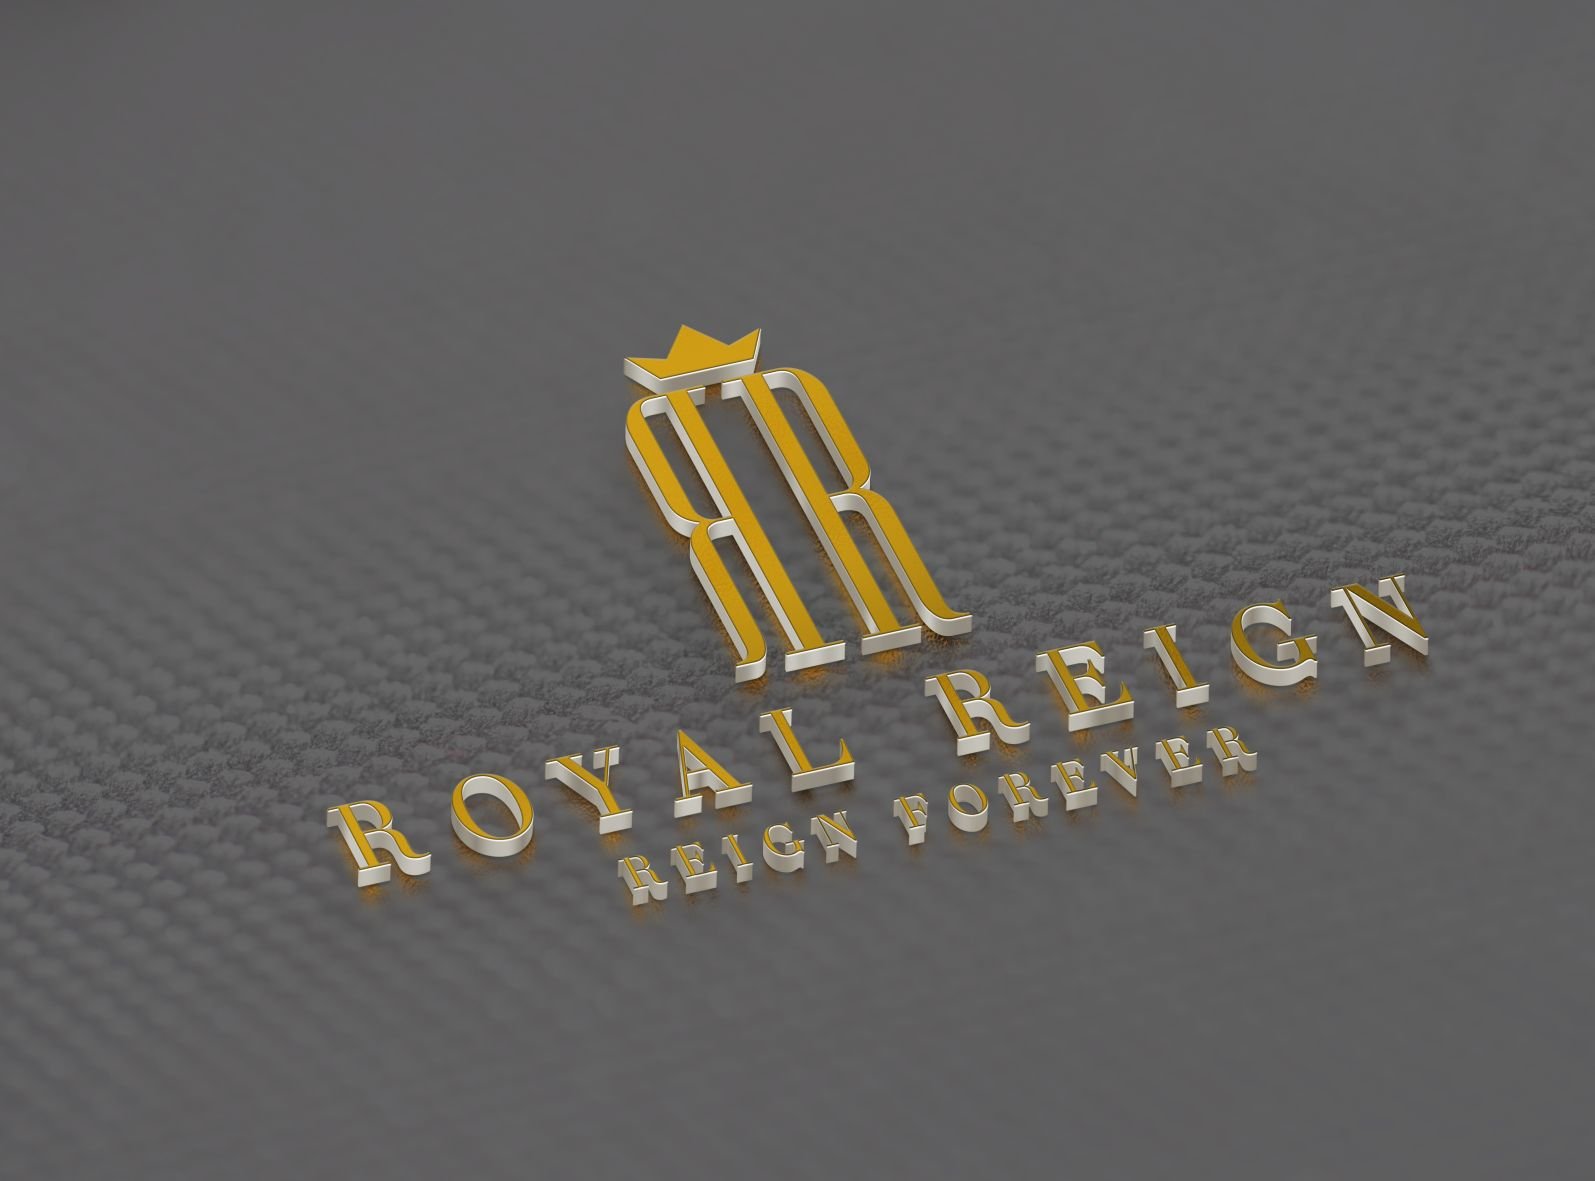 Welcome to Royal Reign's clothing brand! Everyone is of royalty, where you can reign over your own domain! Stay locked in for releases coming soon!